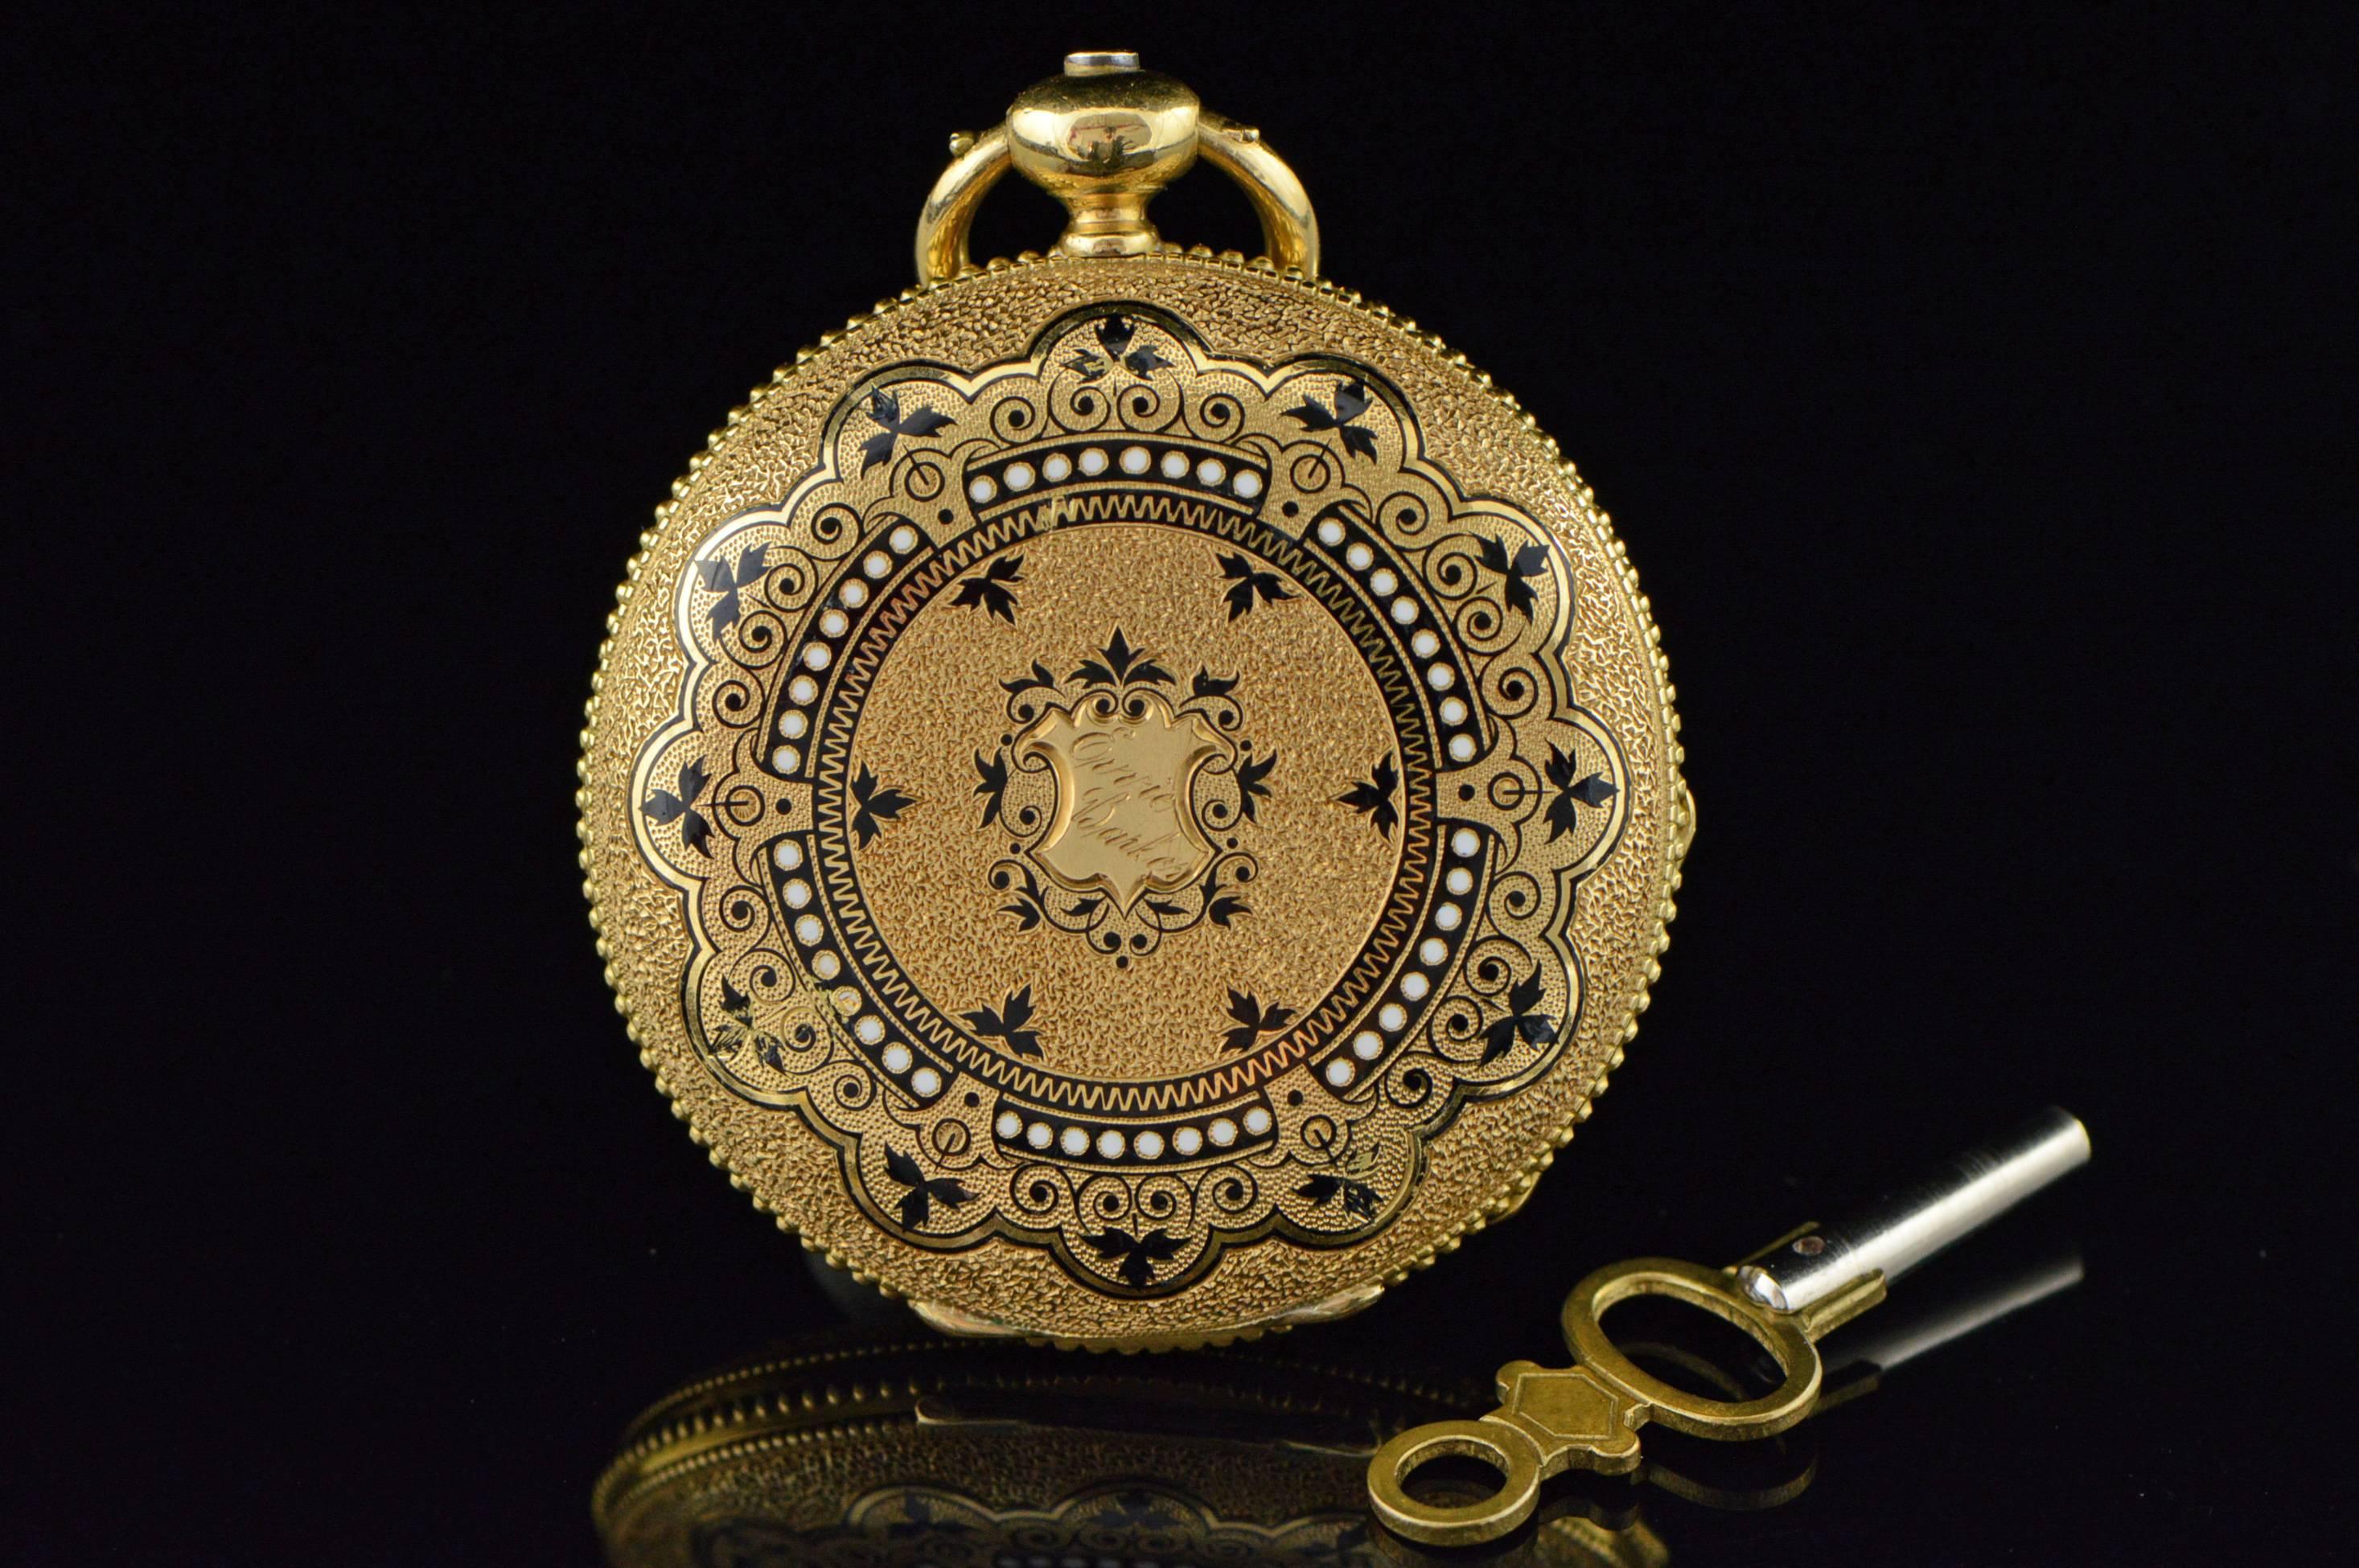 ·Item: Ernest Francillon of Longines 1800s Key Wind Beautiful Enamel Pocket Watch

·Era: Victorian / 1850s

·Composition: 18k Gold Marked / Tested

·Condition:  Watch is not running. This watch is an early watch by the founder of Longines. It